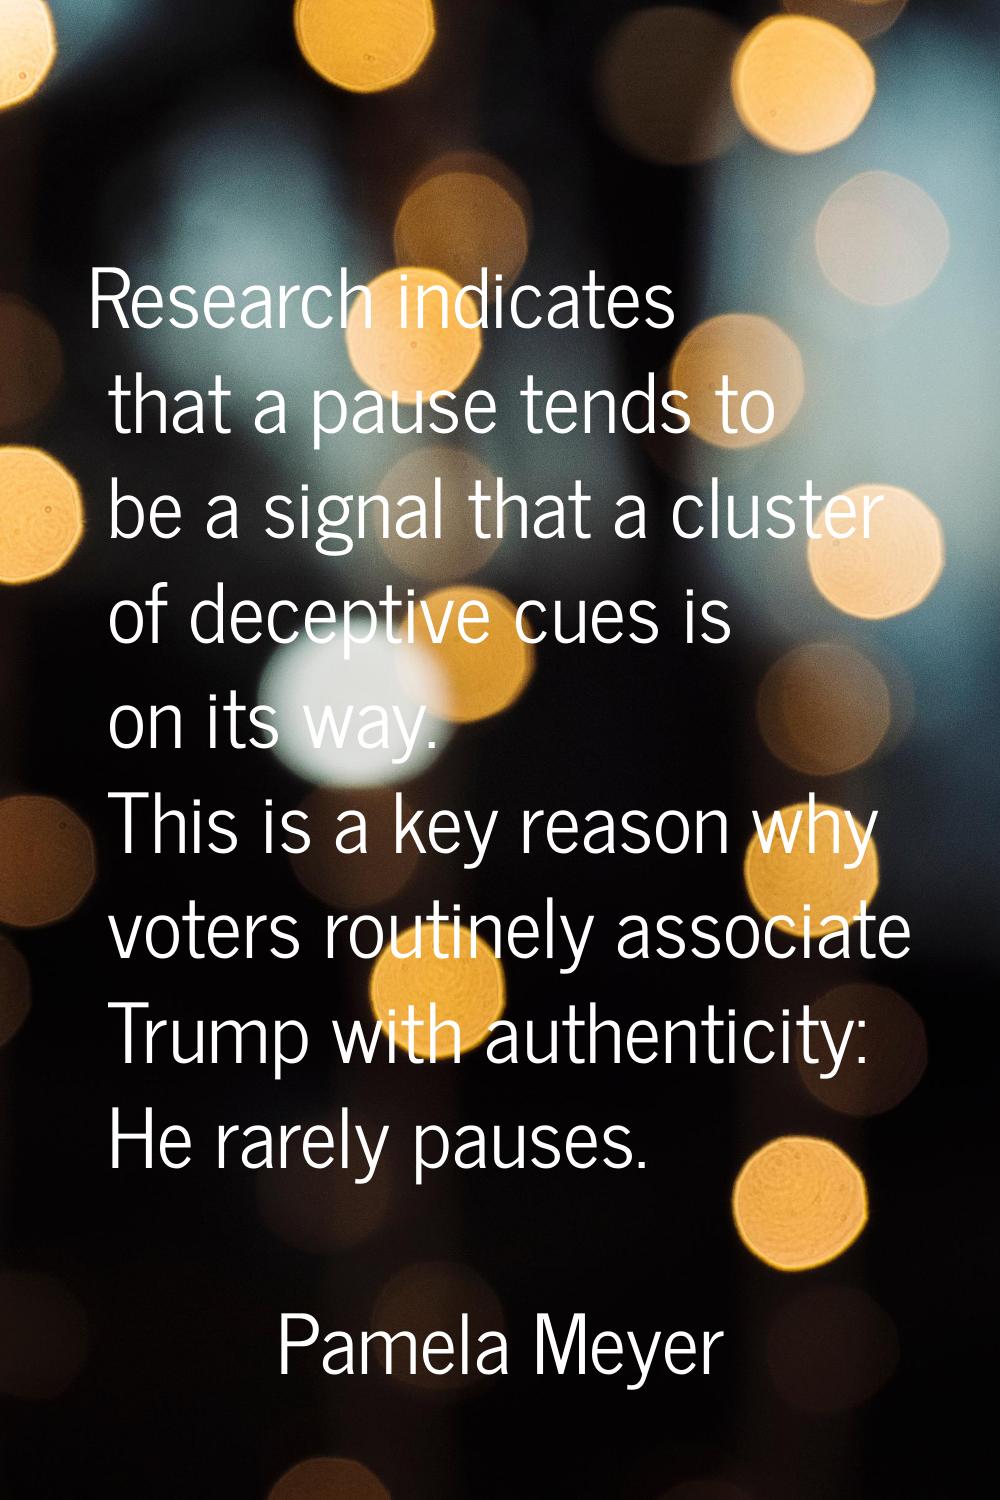 Research indicates that a pause tends to be a signal that a cluster of deceptive cues is on its way